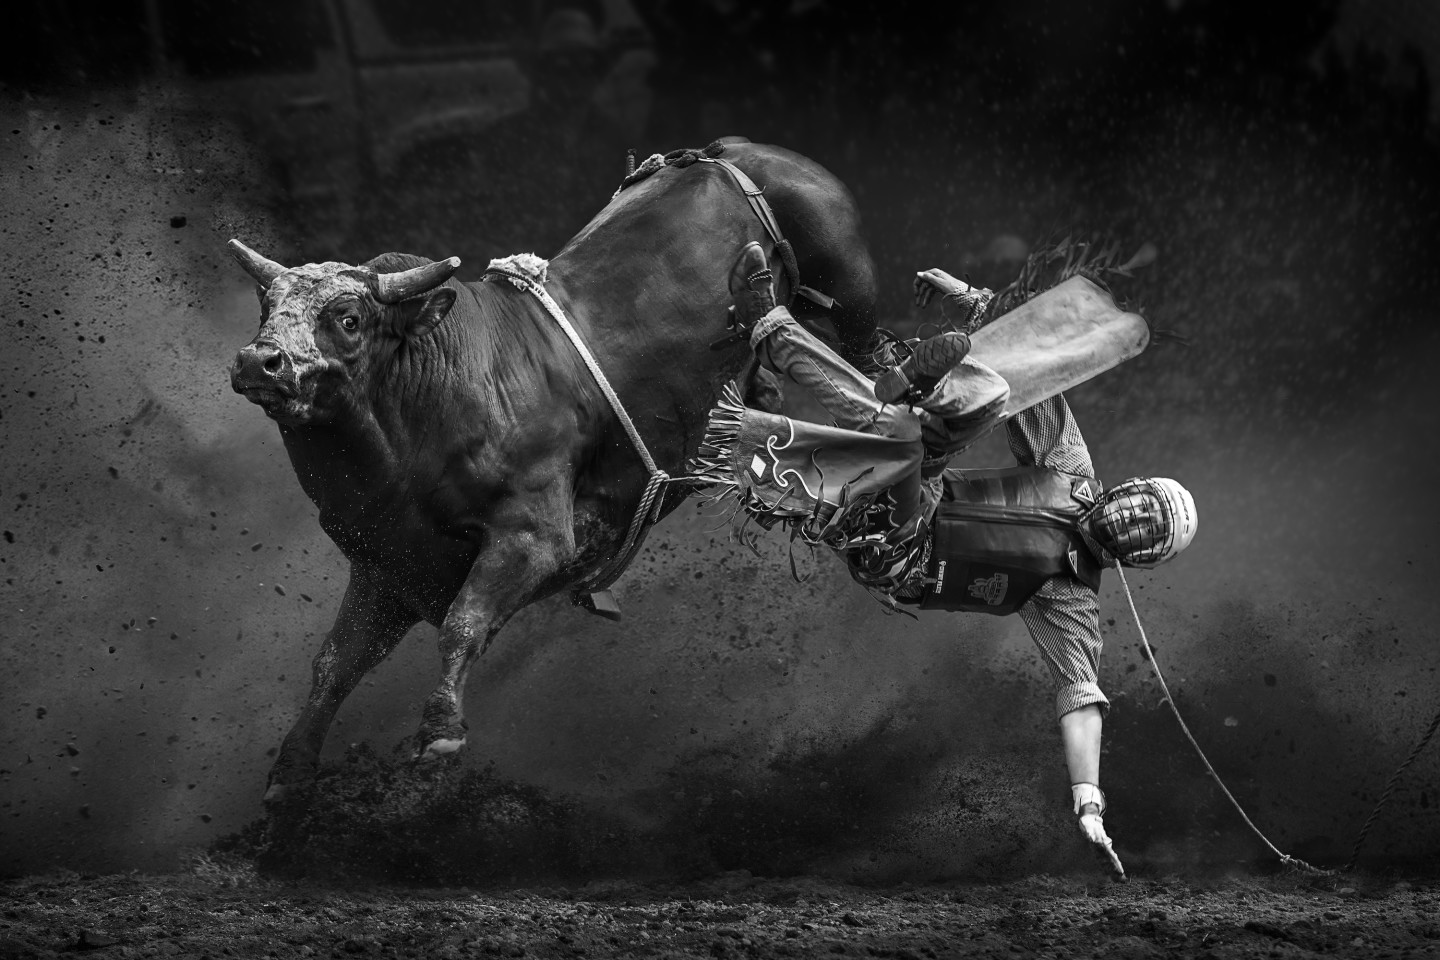 Honorable Mention - Break Away. A man falling off a bull in a rodeo event held in Taralga Australia